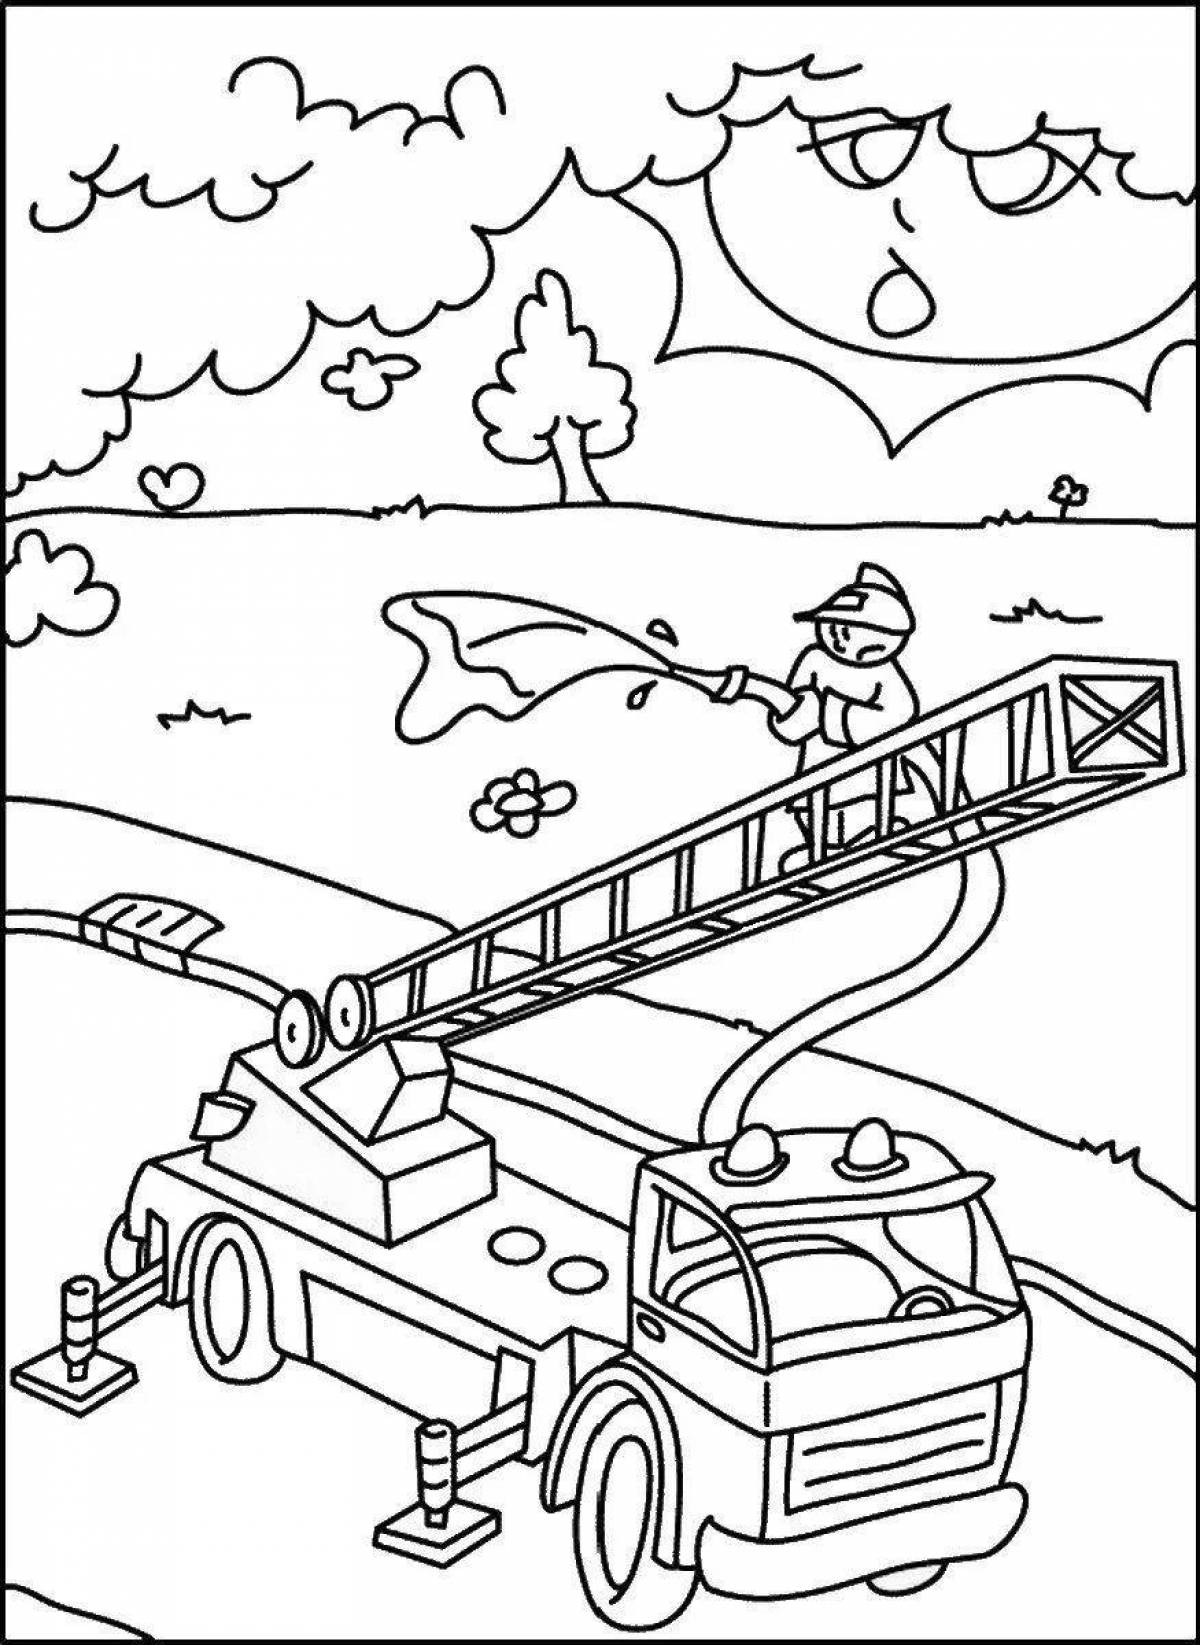 Dazzling fireman coloring for kids